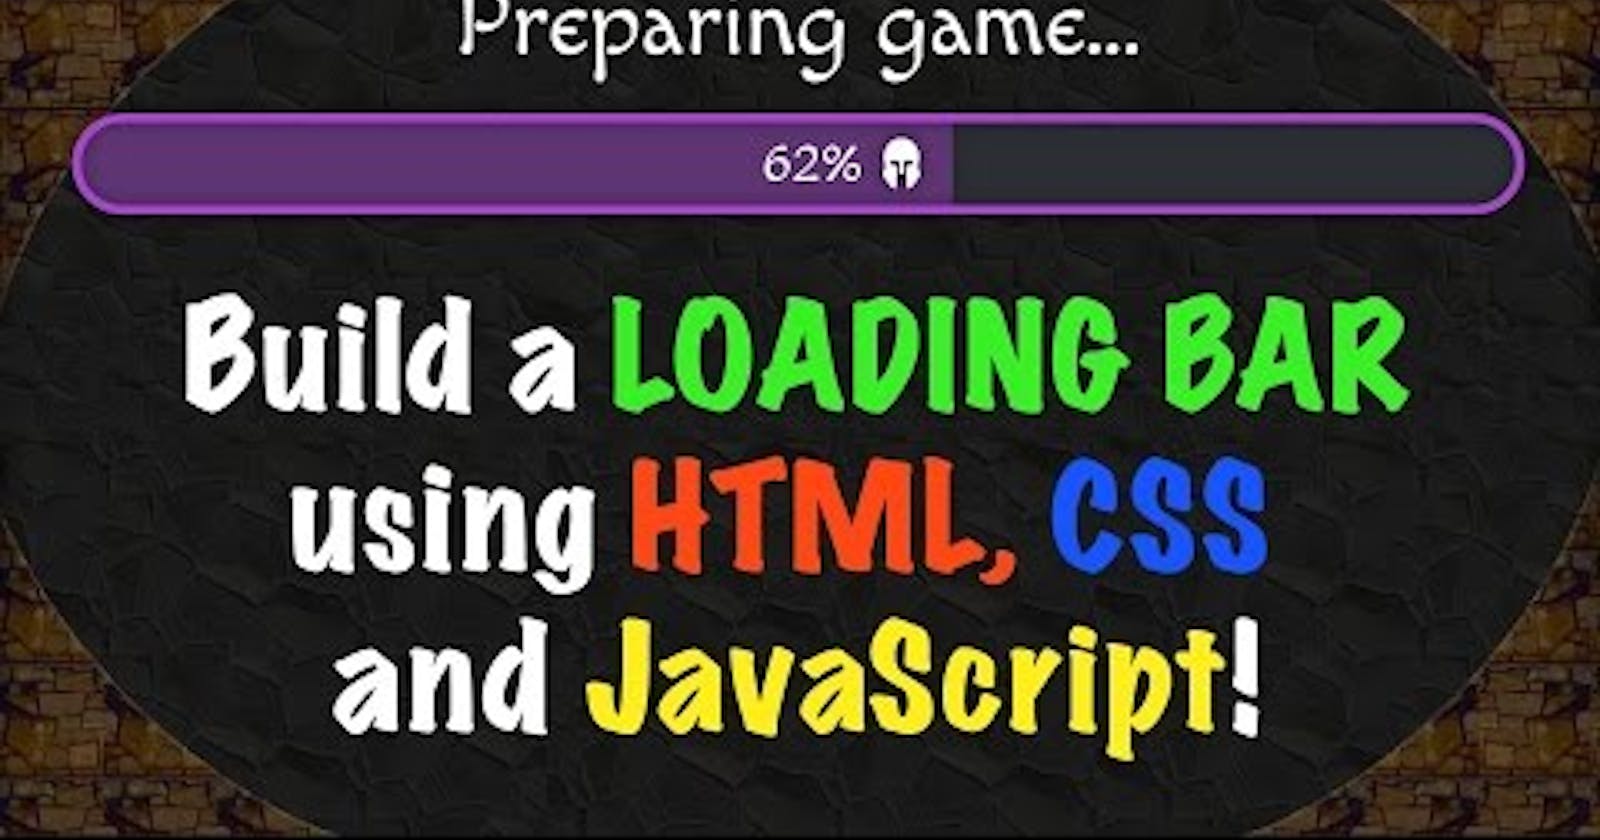 Building a GAME LOADING BAR with HTML, CSS, and JavaScript!